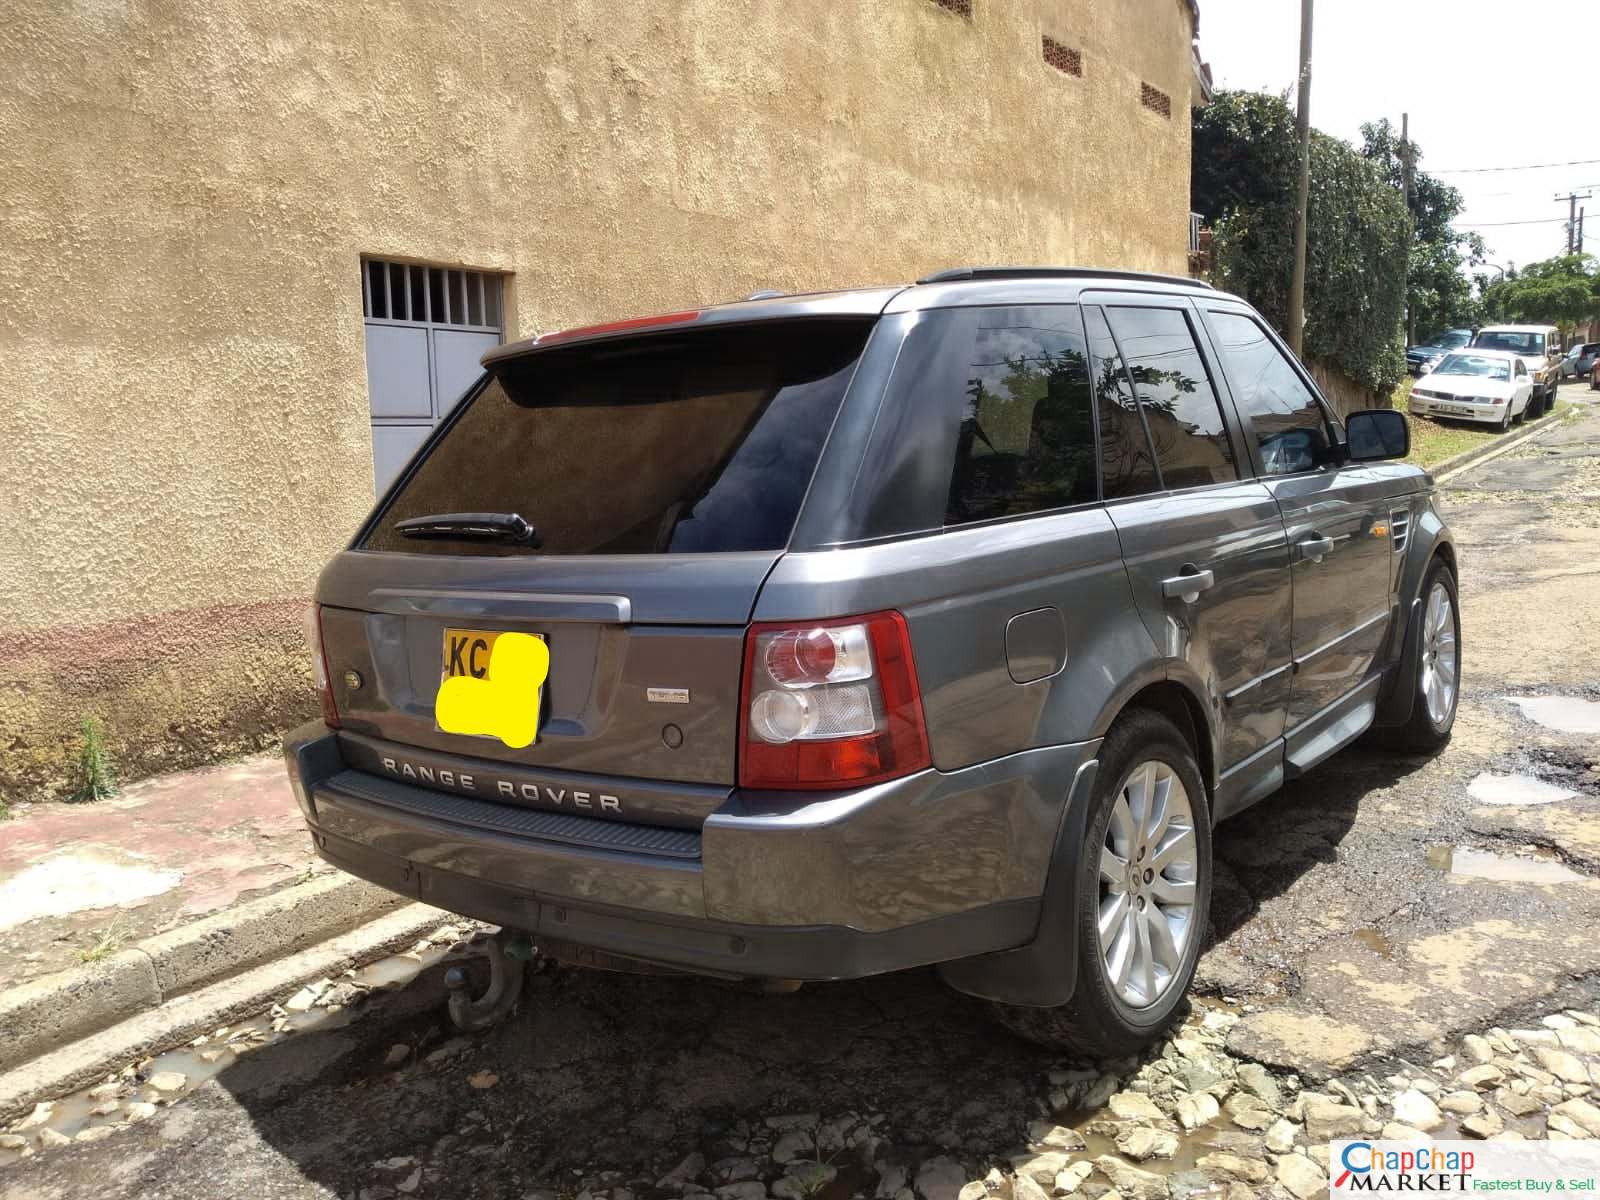 RANGE ROVER sport TDV8 You Pay 40% DEPOSIT TRADE IN OK sport For sale in kenya hire purchase installments exclusive